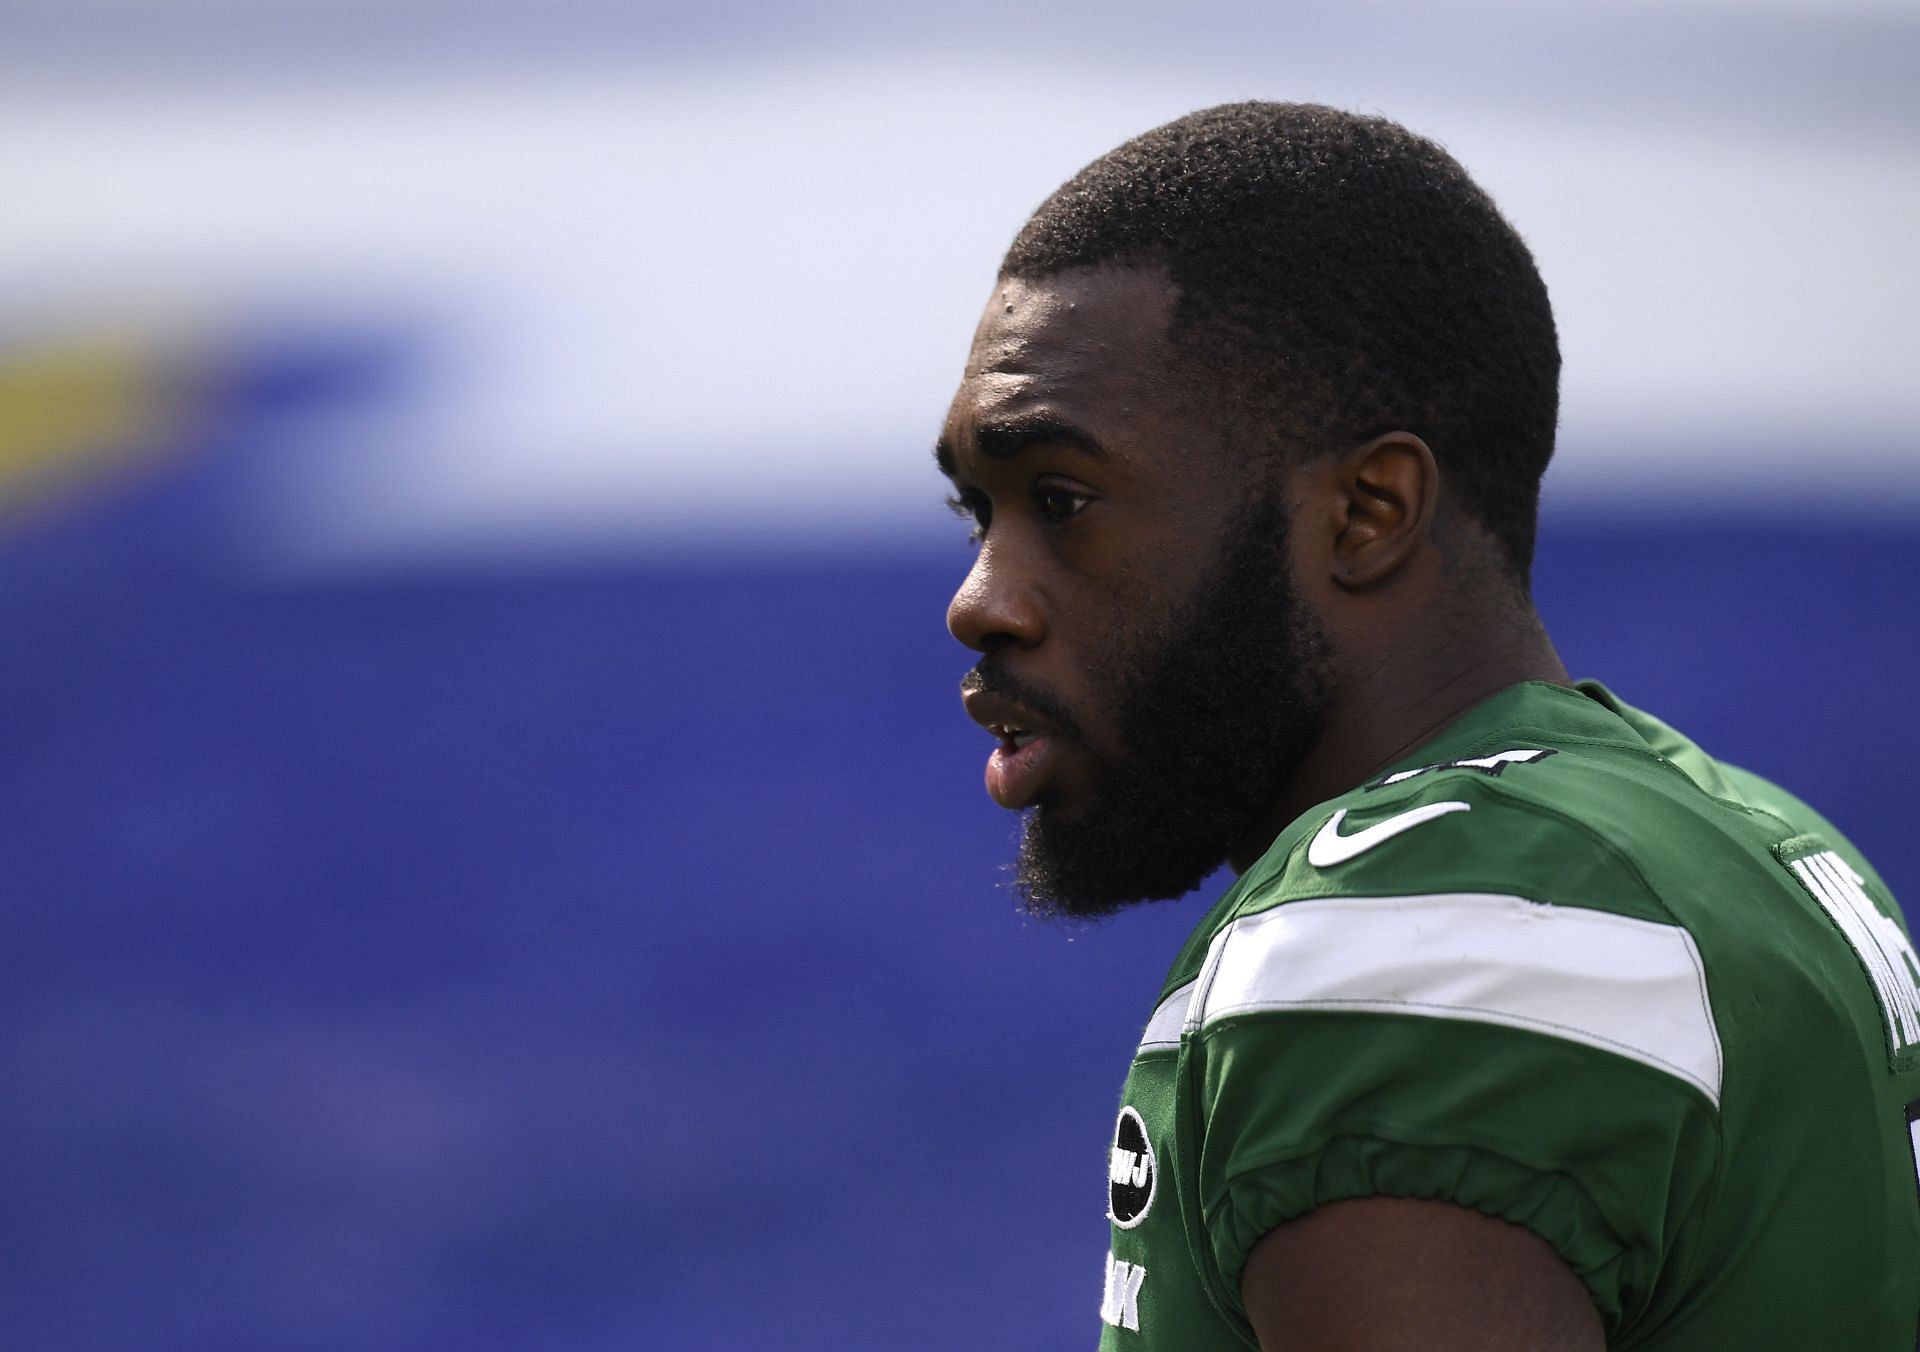 Denzel Mims played three seasons with the New York Jets